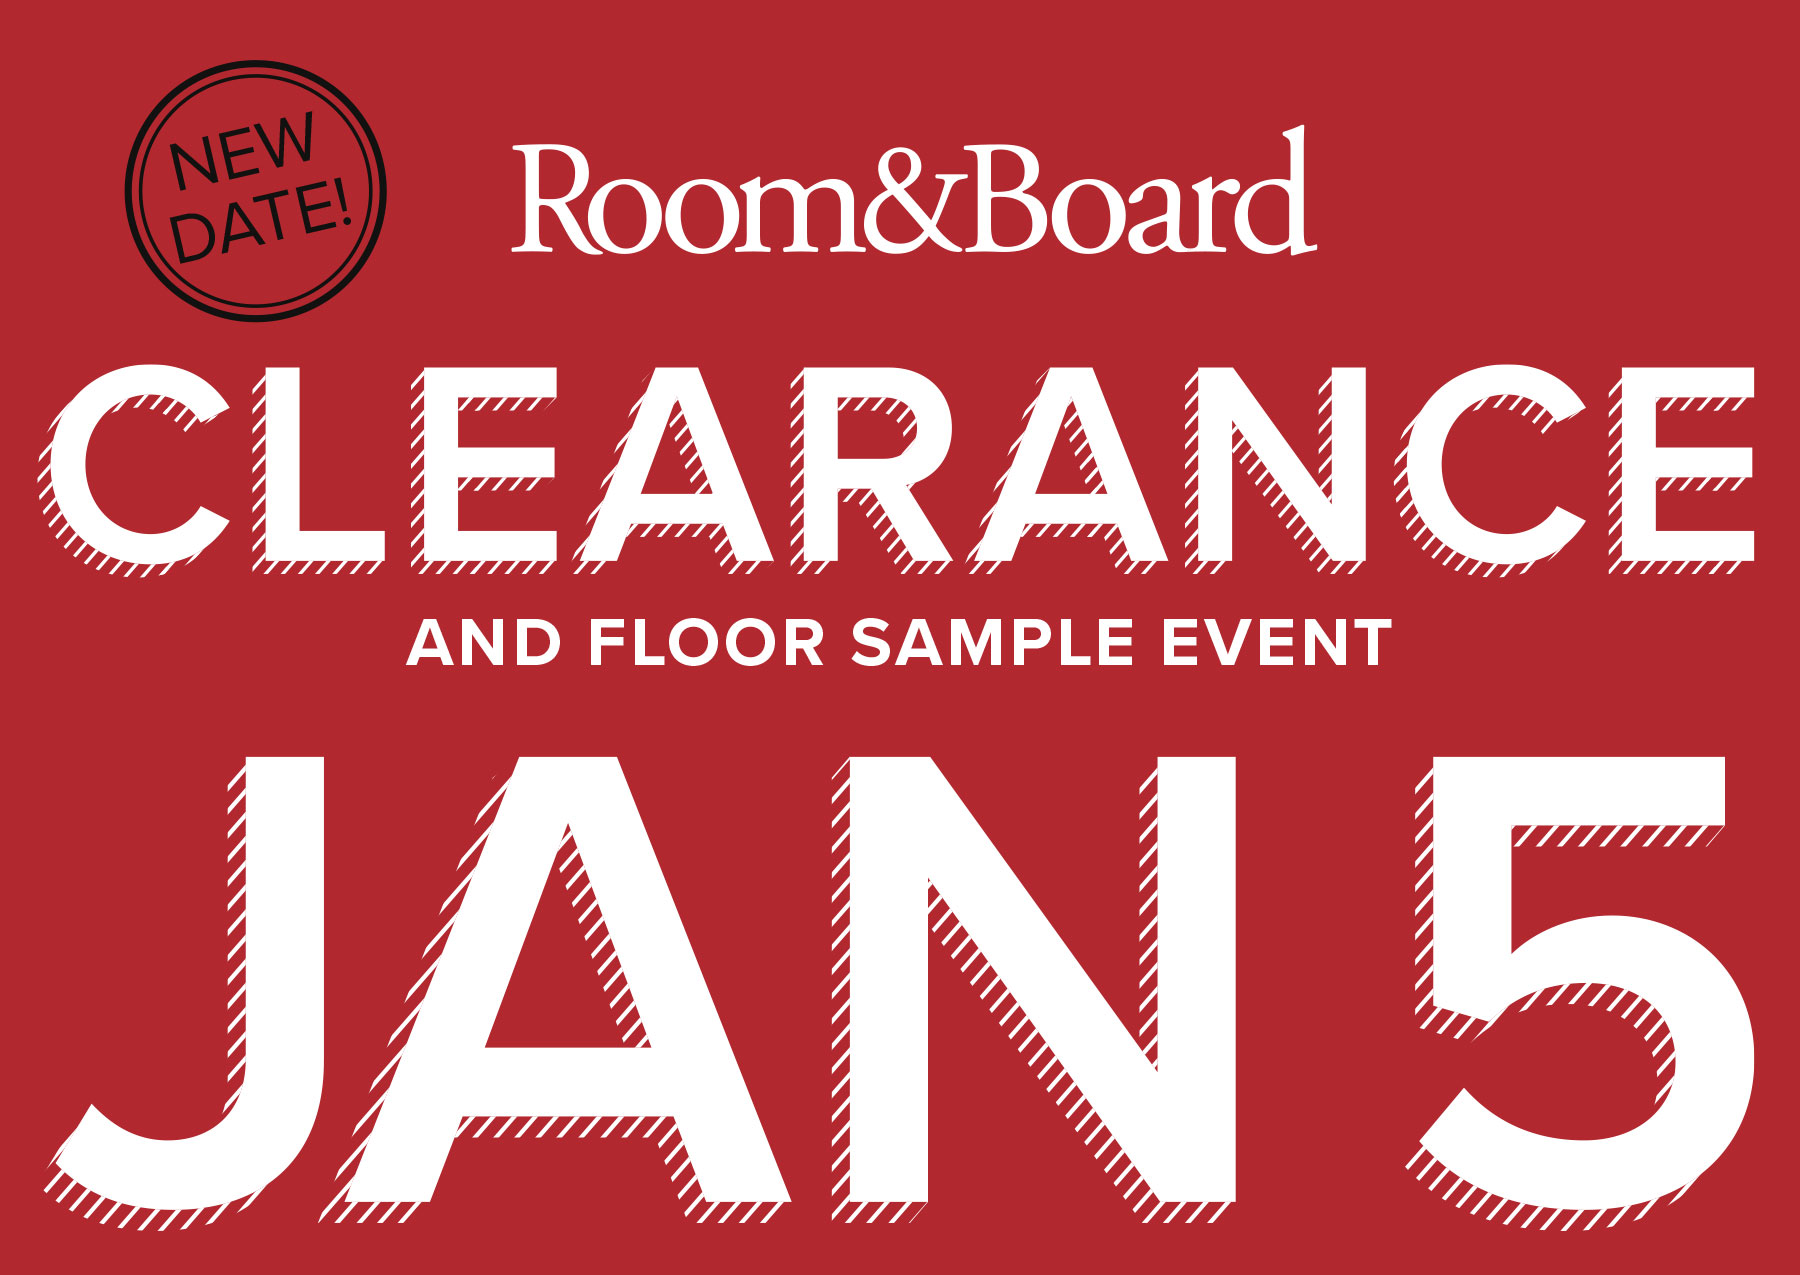 Room & Board's Yearly Clearance Event – Saturday January 5th